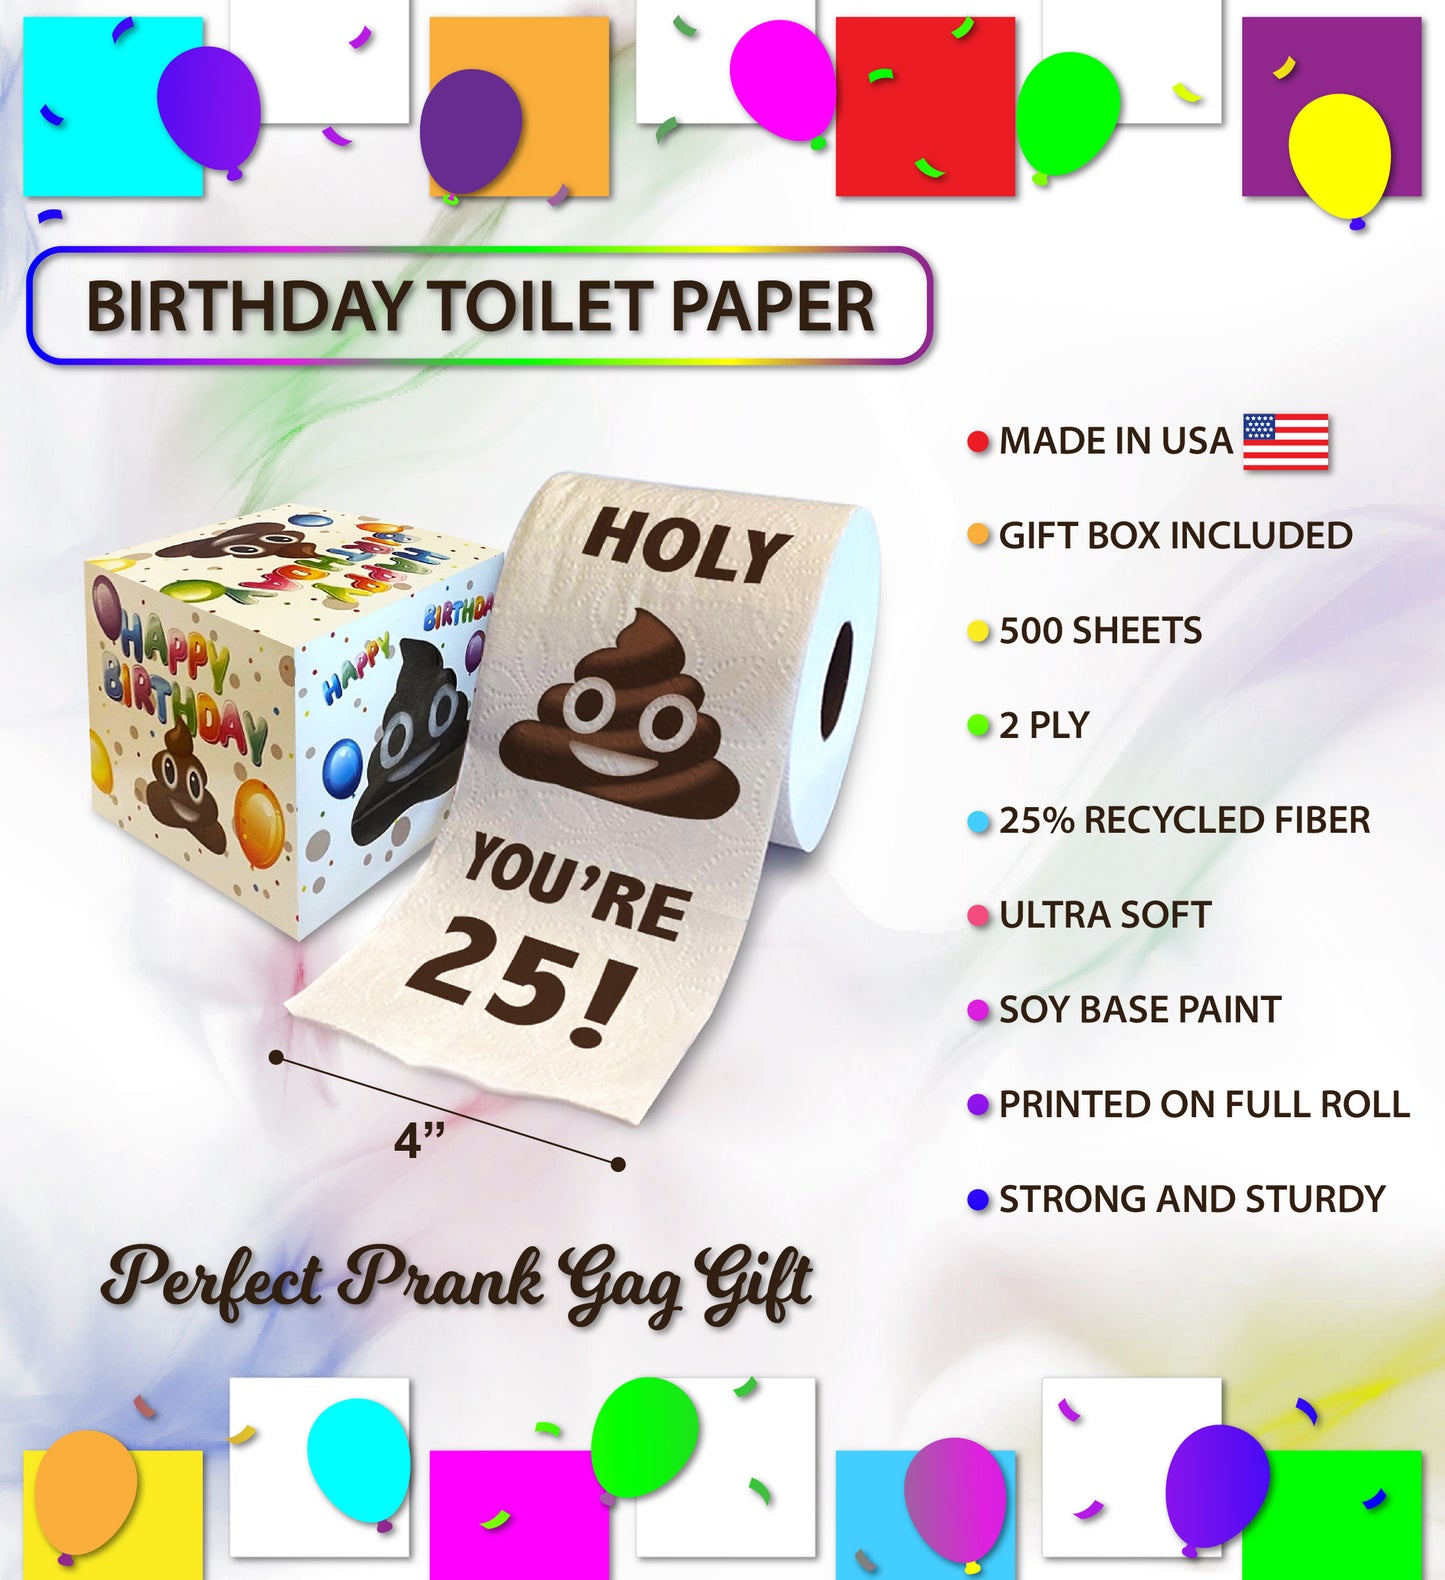 Printed TP Holy Poop You're 28 Printed Toilet Paper Funny Gag Gift – 500 Sheets